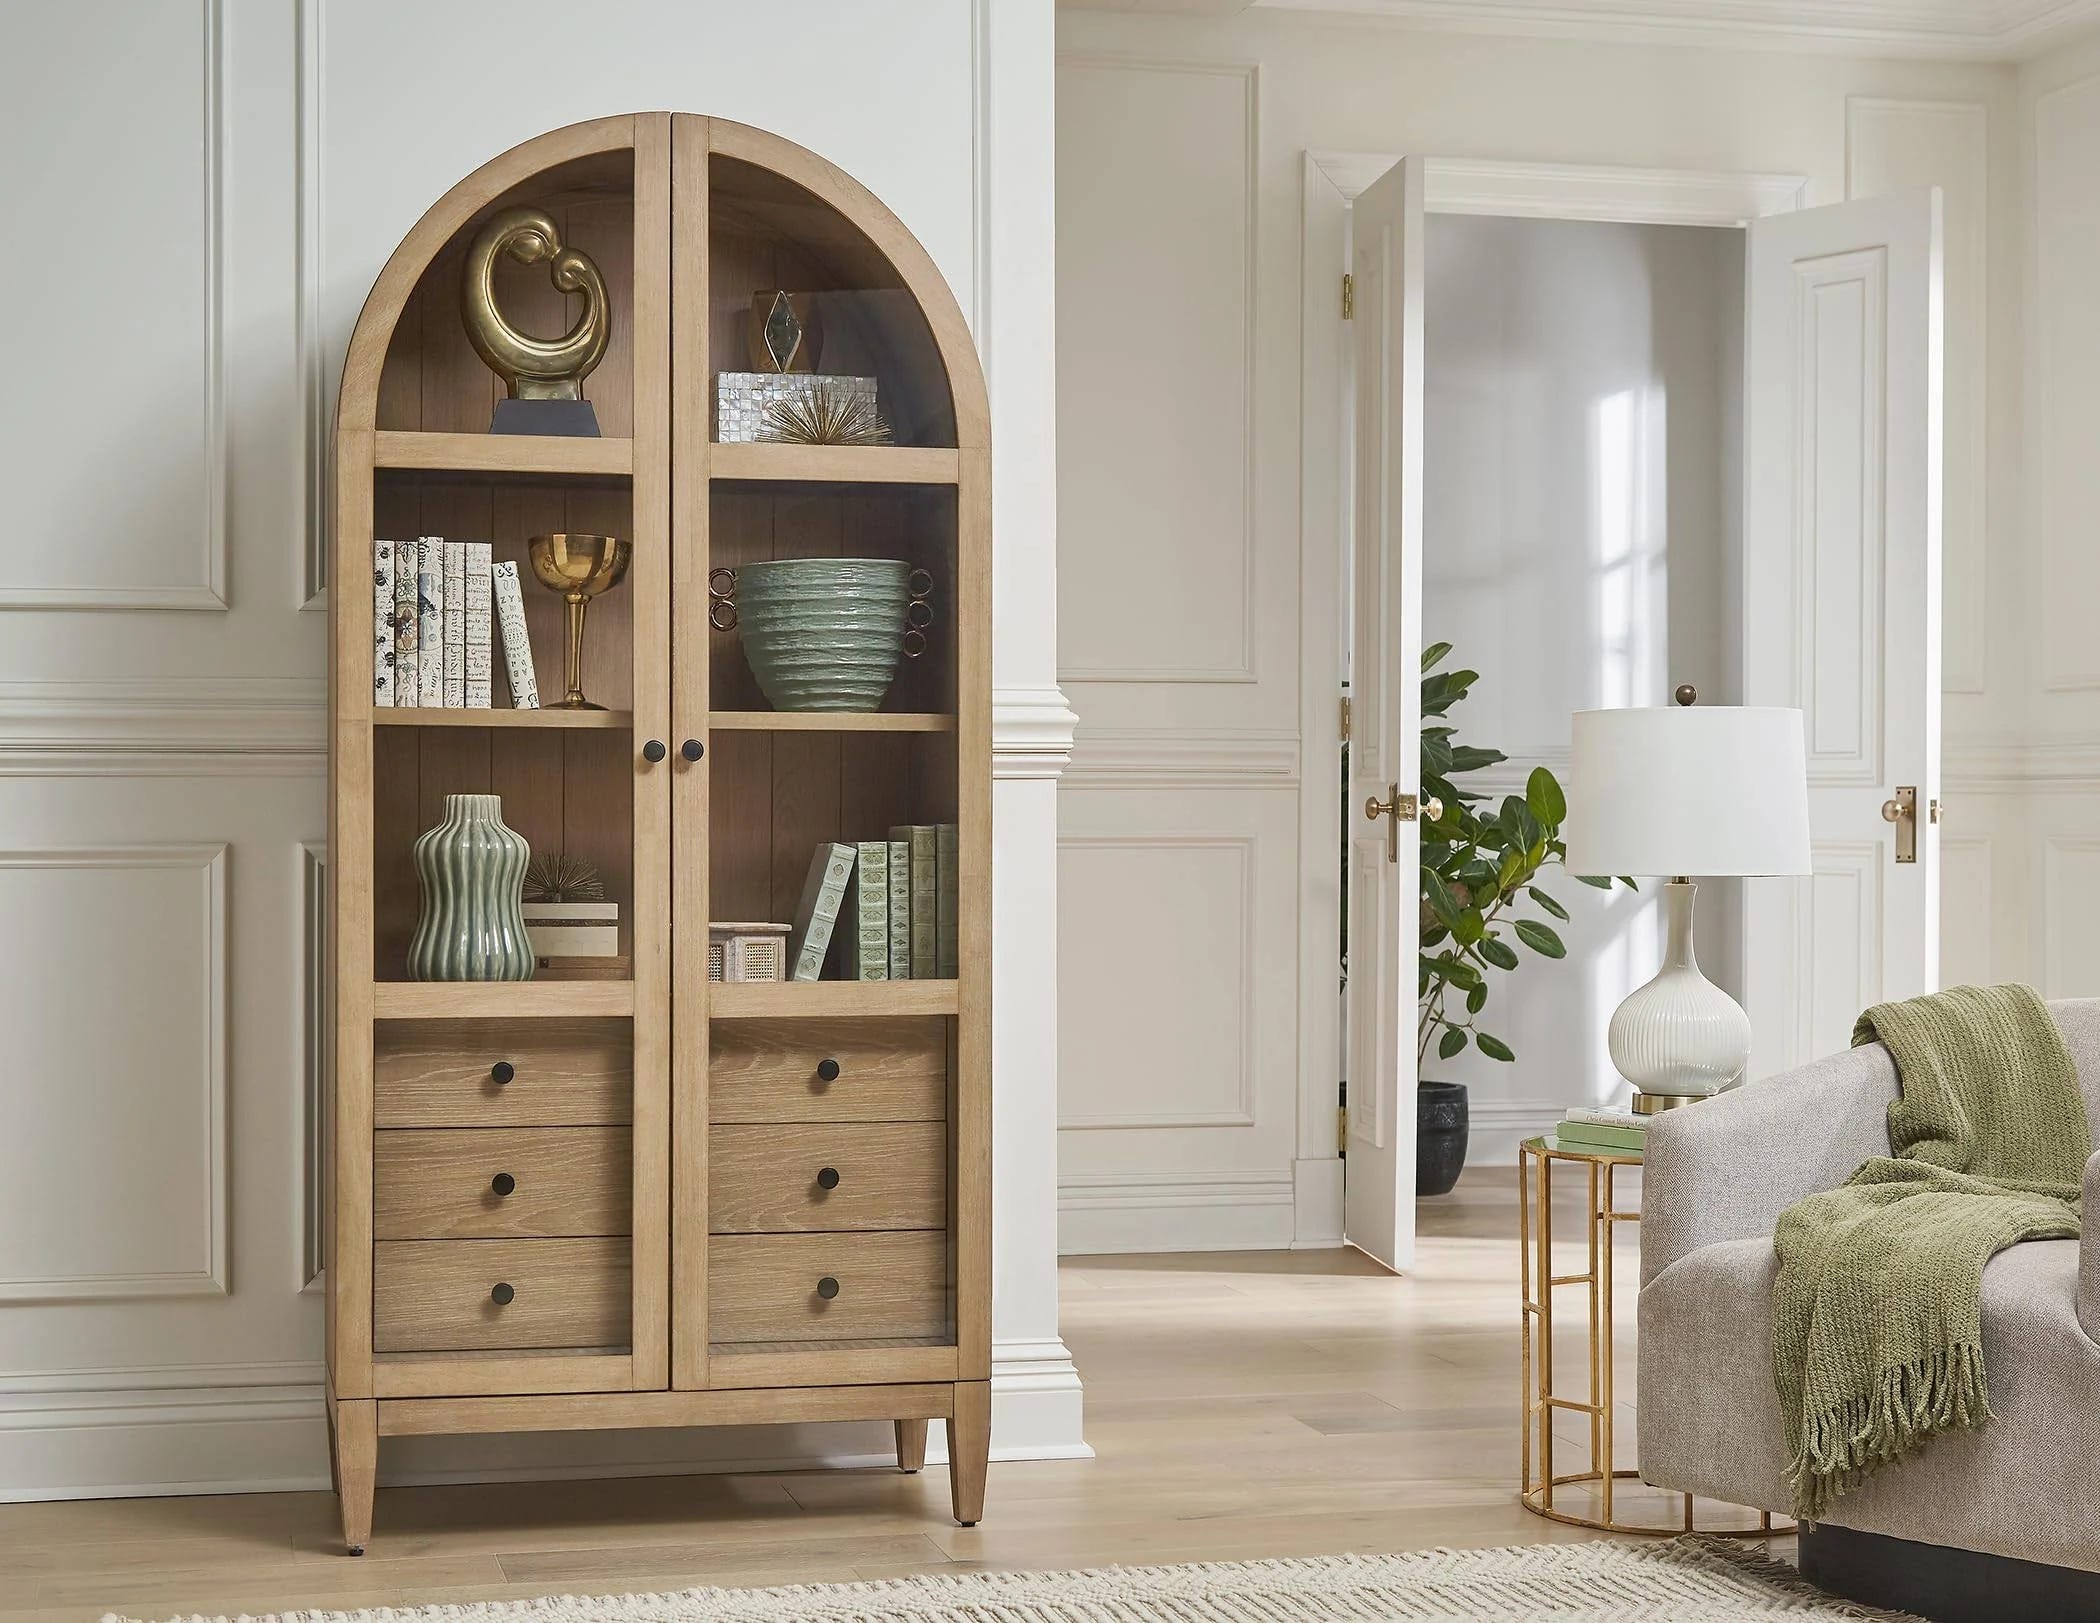 Contemporary Arched Wood Display Cabinet for Books and Decor | Image